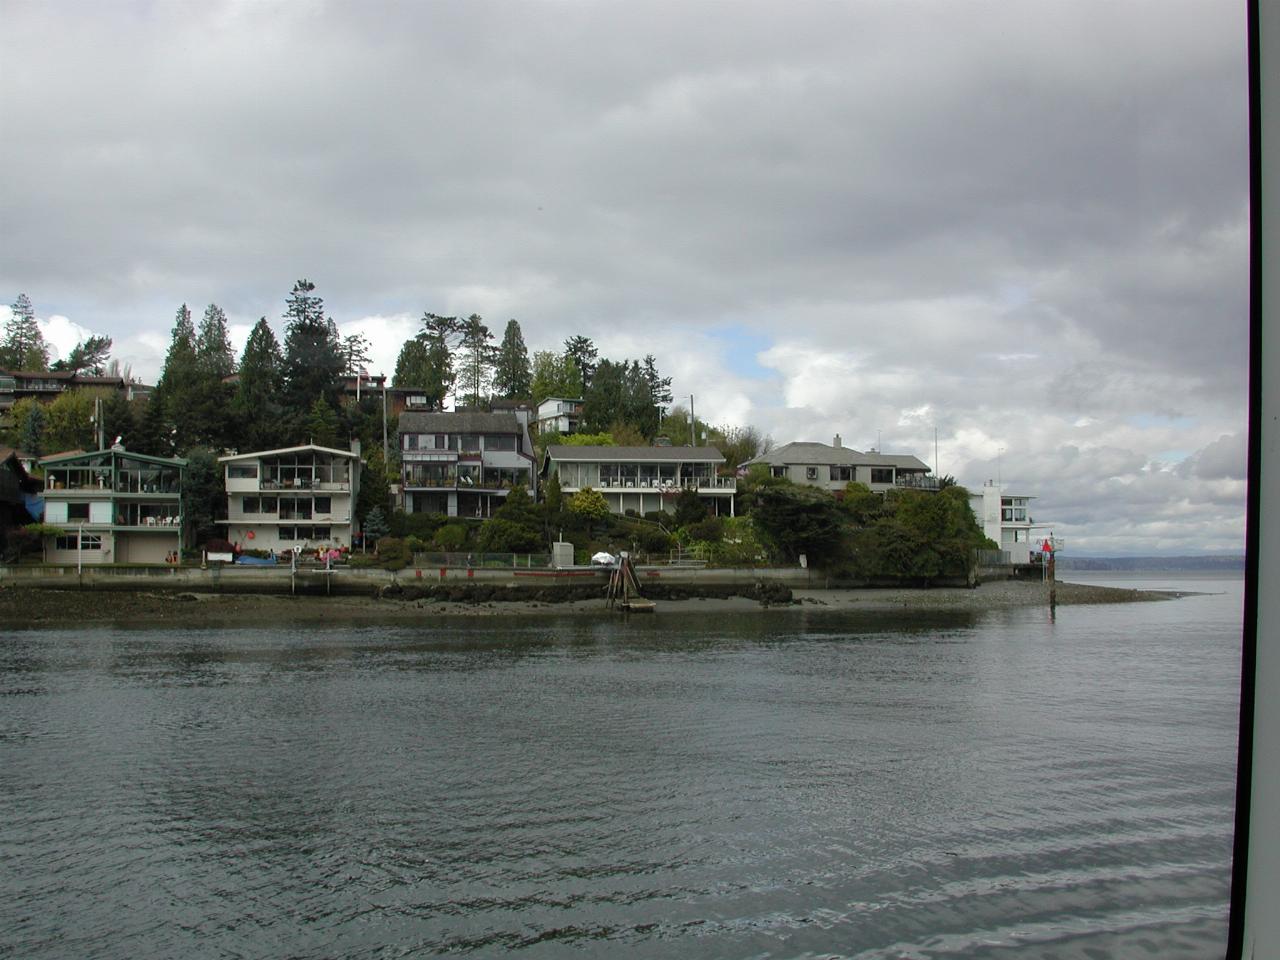 Houses near Discovery Park at exit from Ballard Locks